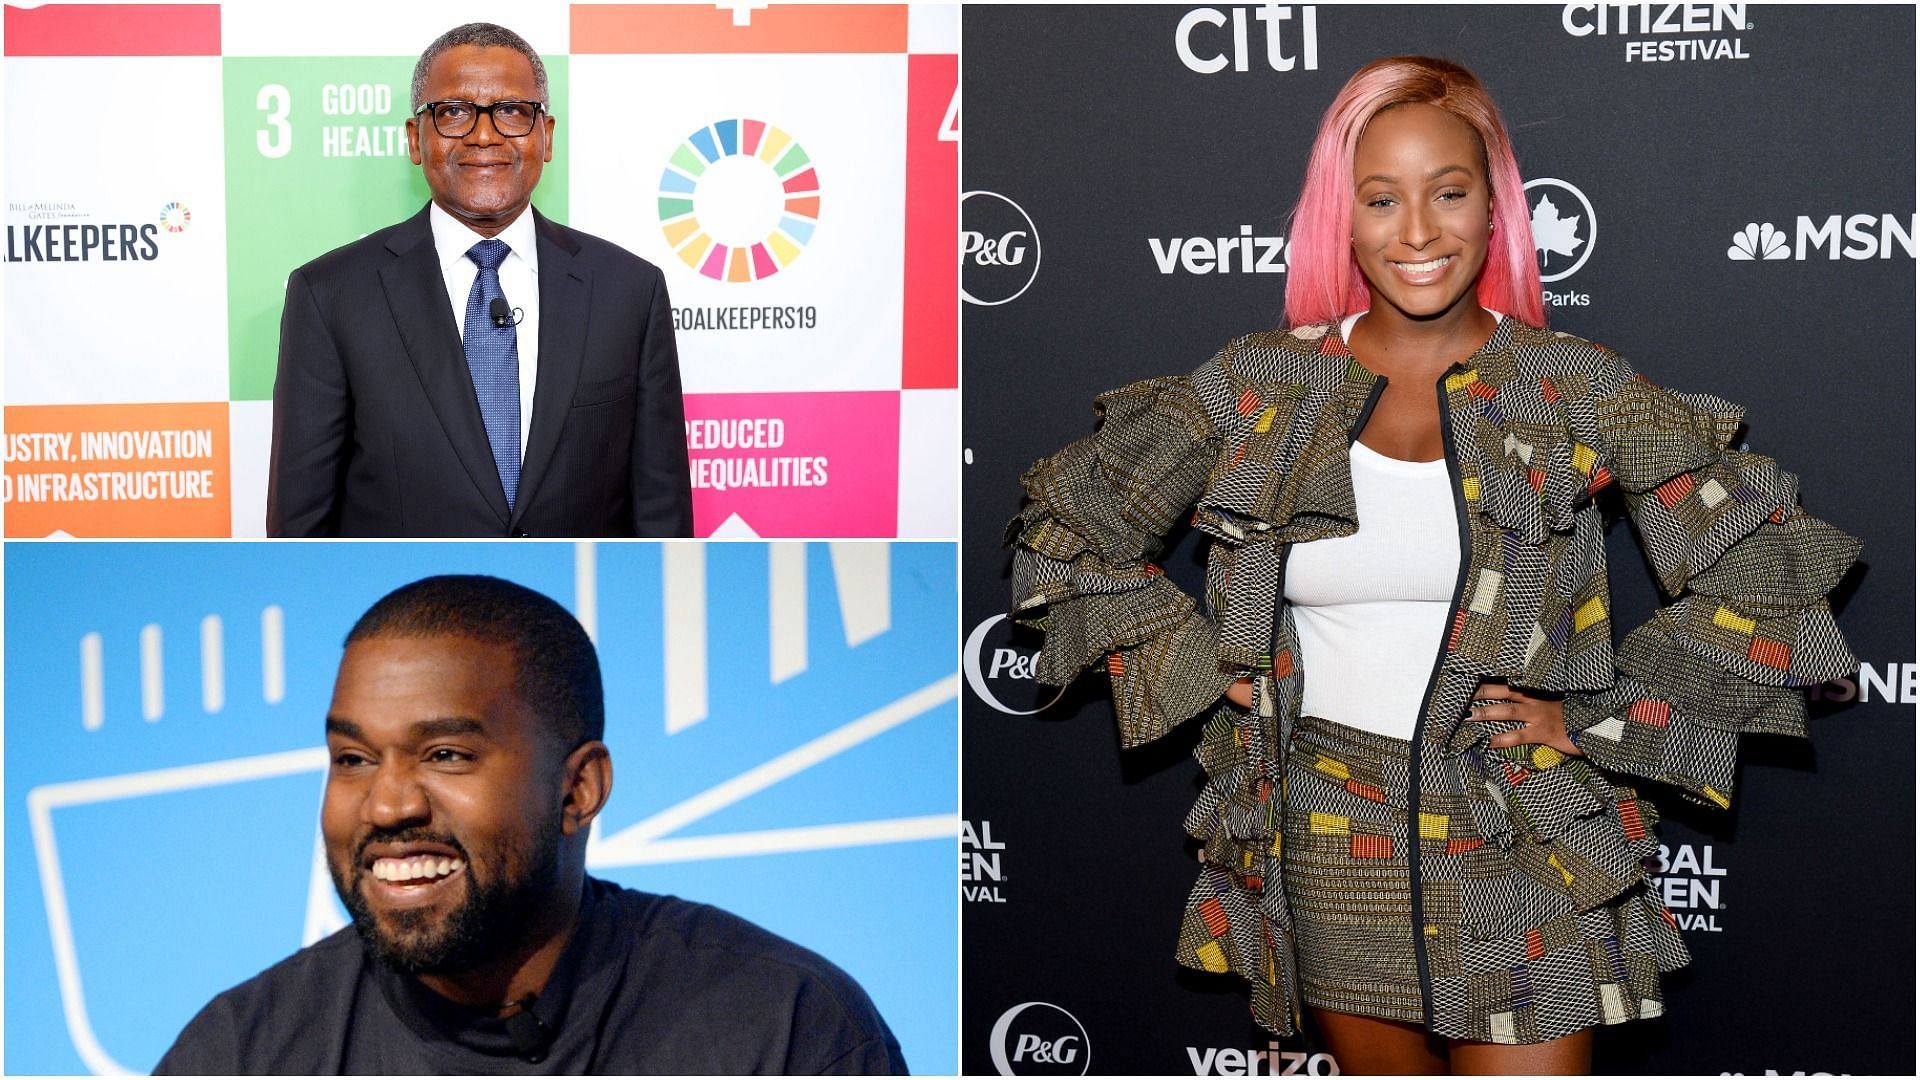 DJ Cuppy called her godfather Aliko Dangote the richest black man instead of Kanye West (Images via Noam Galai/Christopher Farber/Brad Barket/Getty Images)